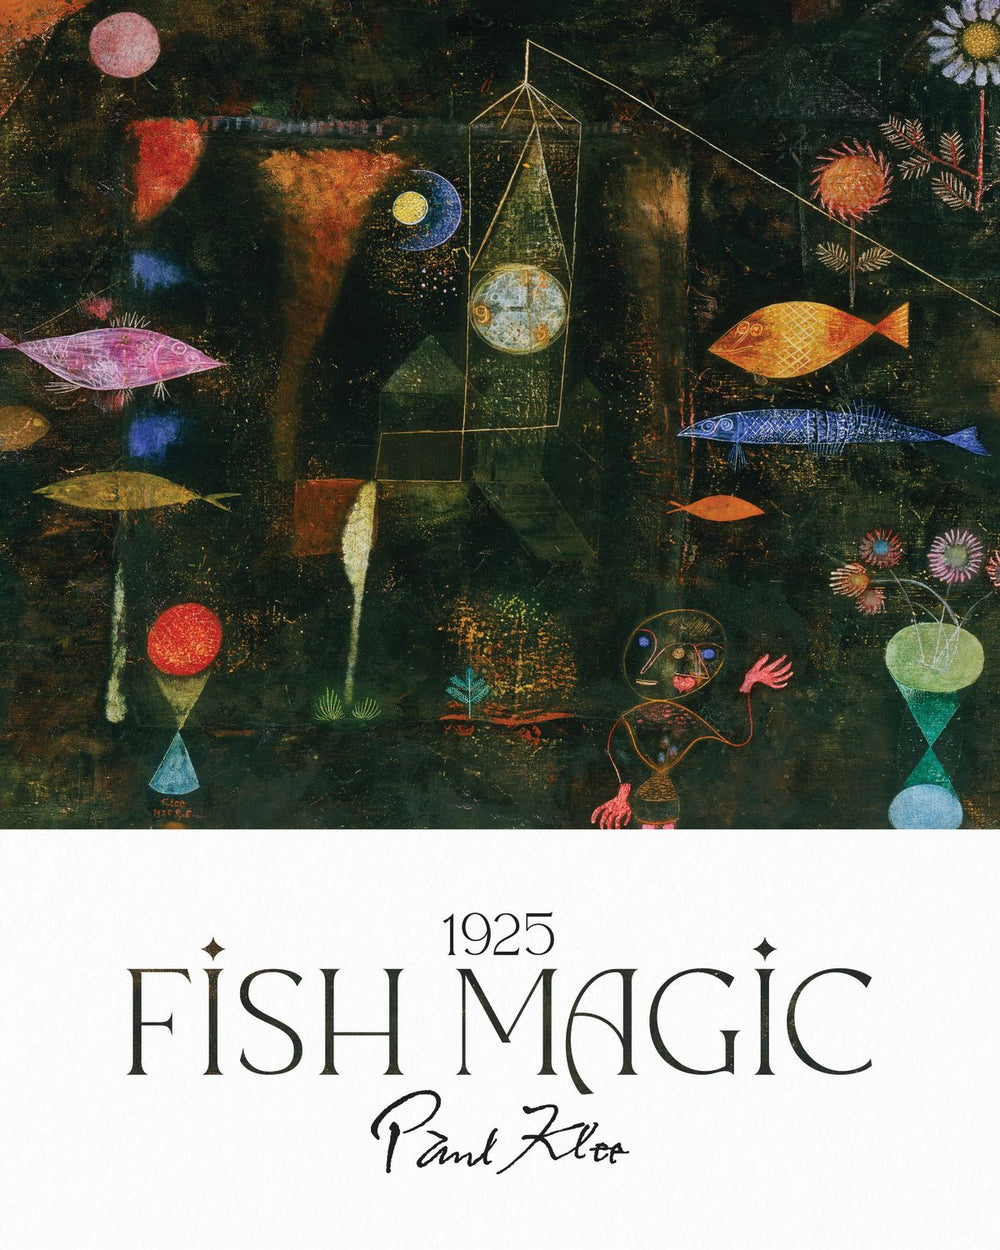 Fish Magic Klee Exhibition Poster